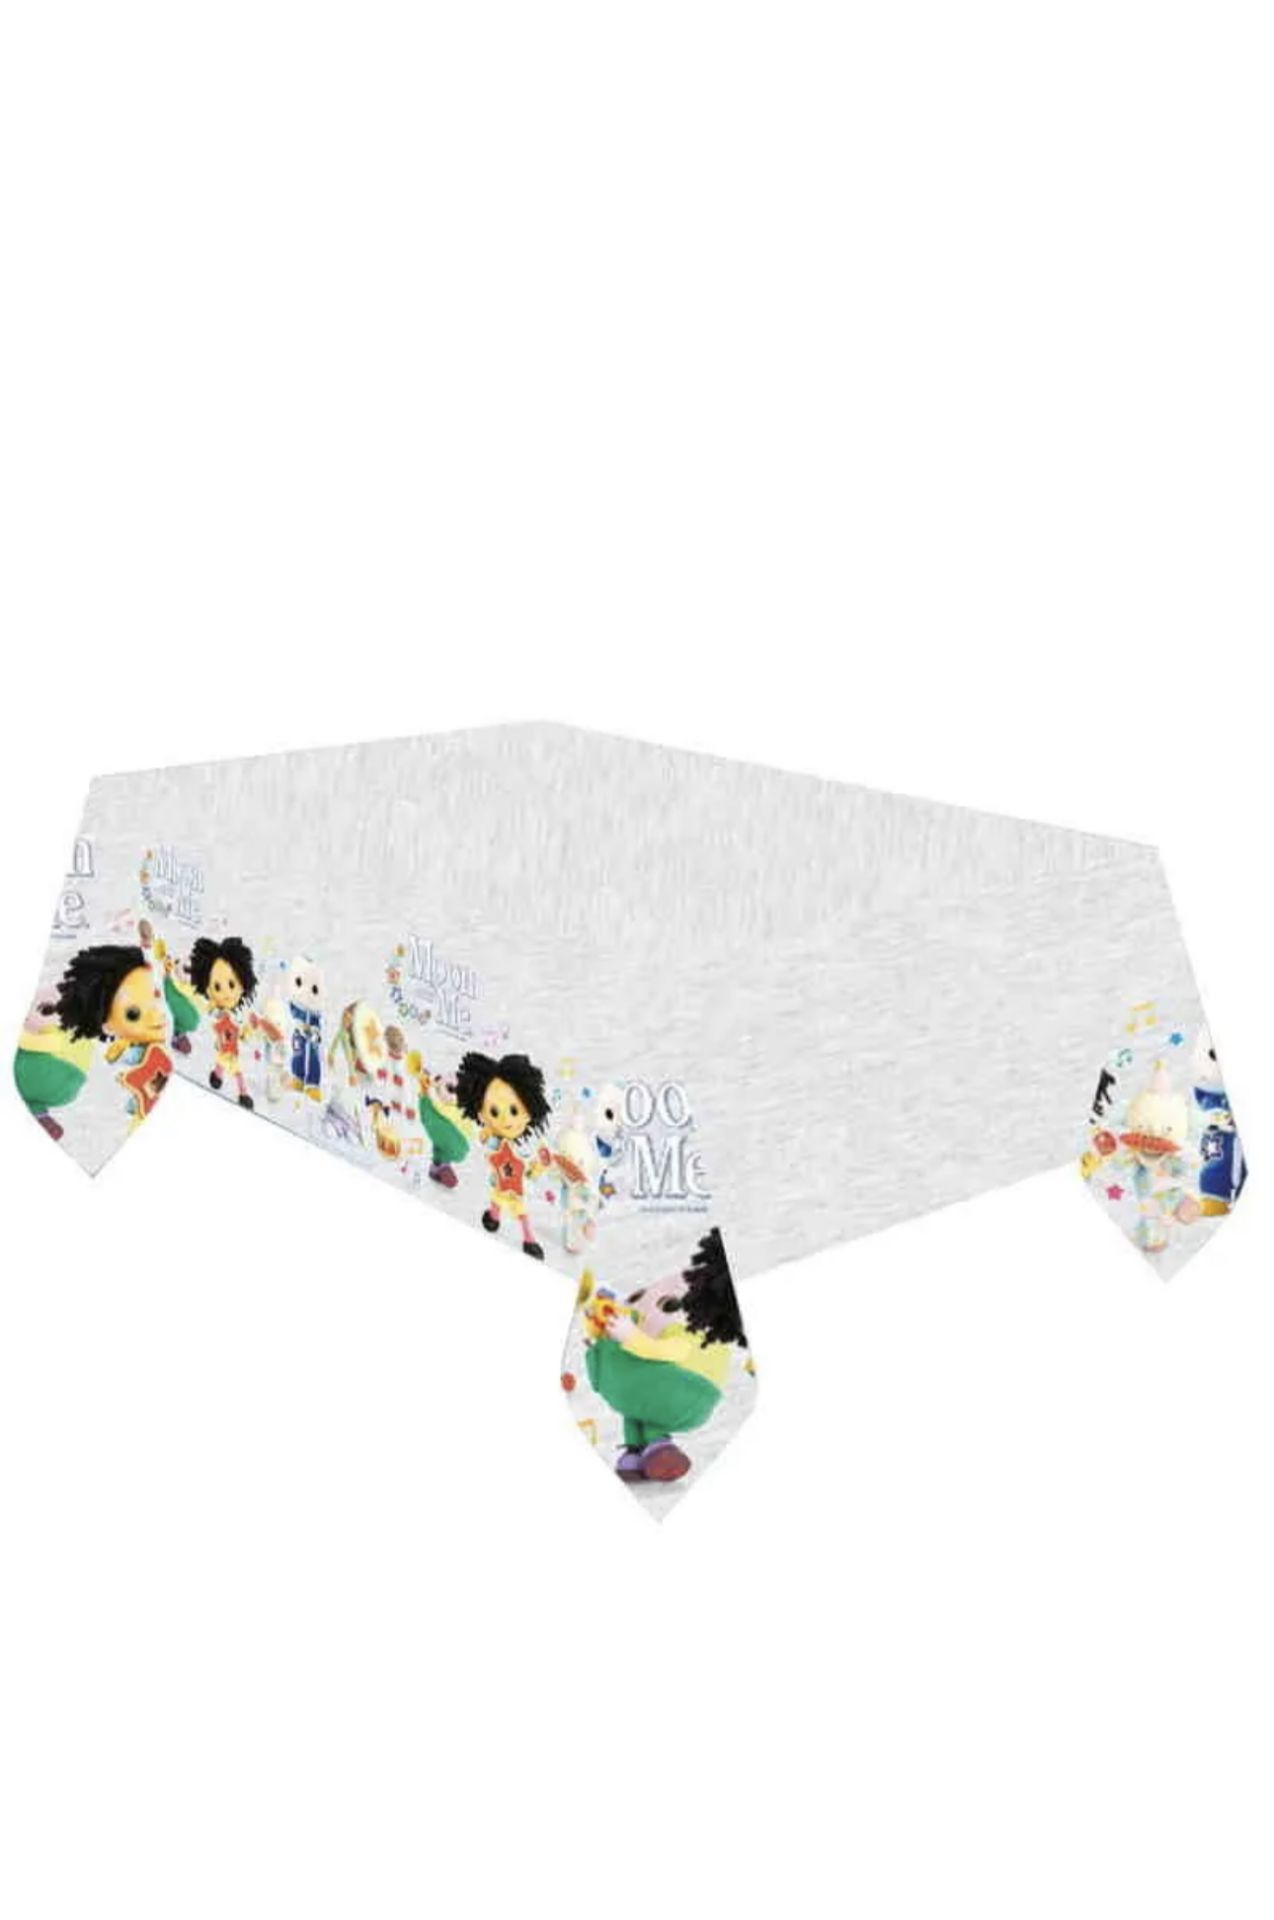 120x Brand new MOON AND ME TABLE COVERS